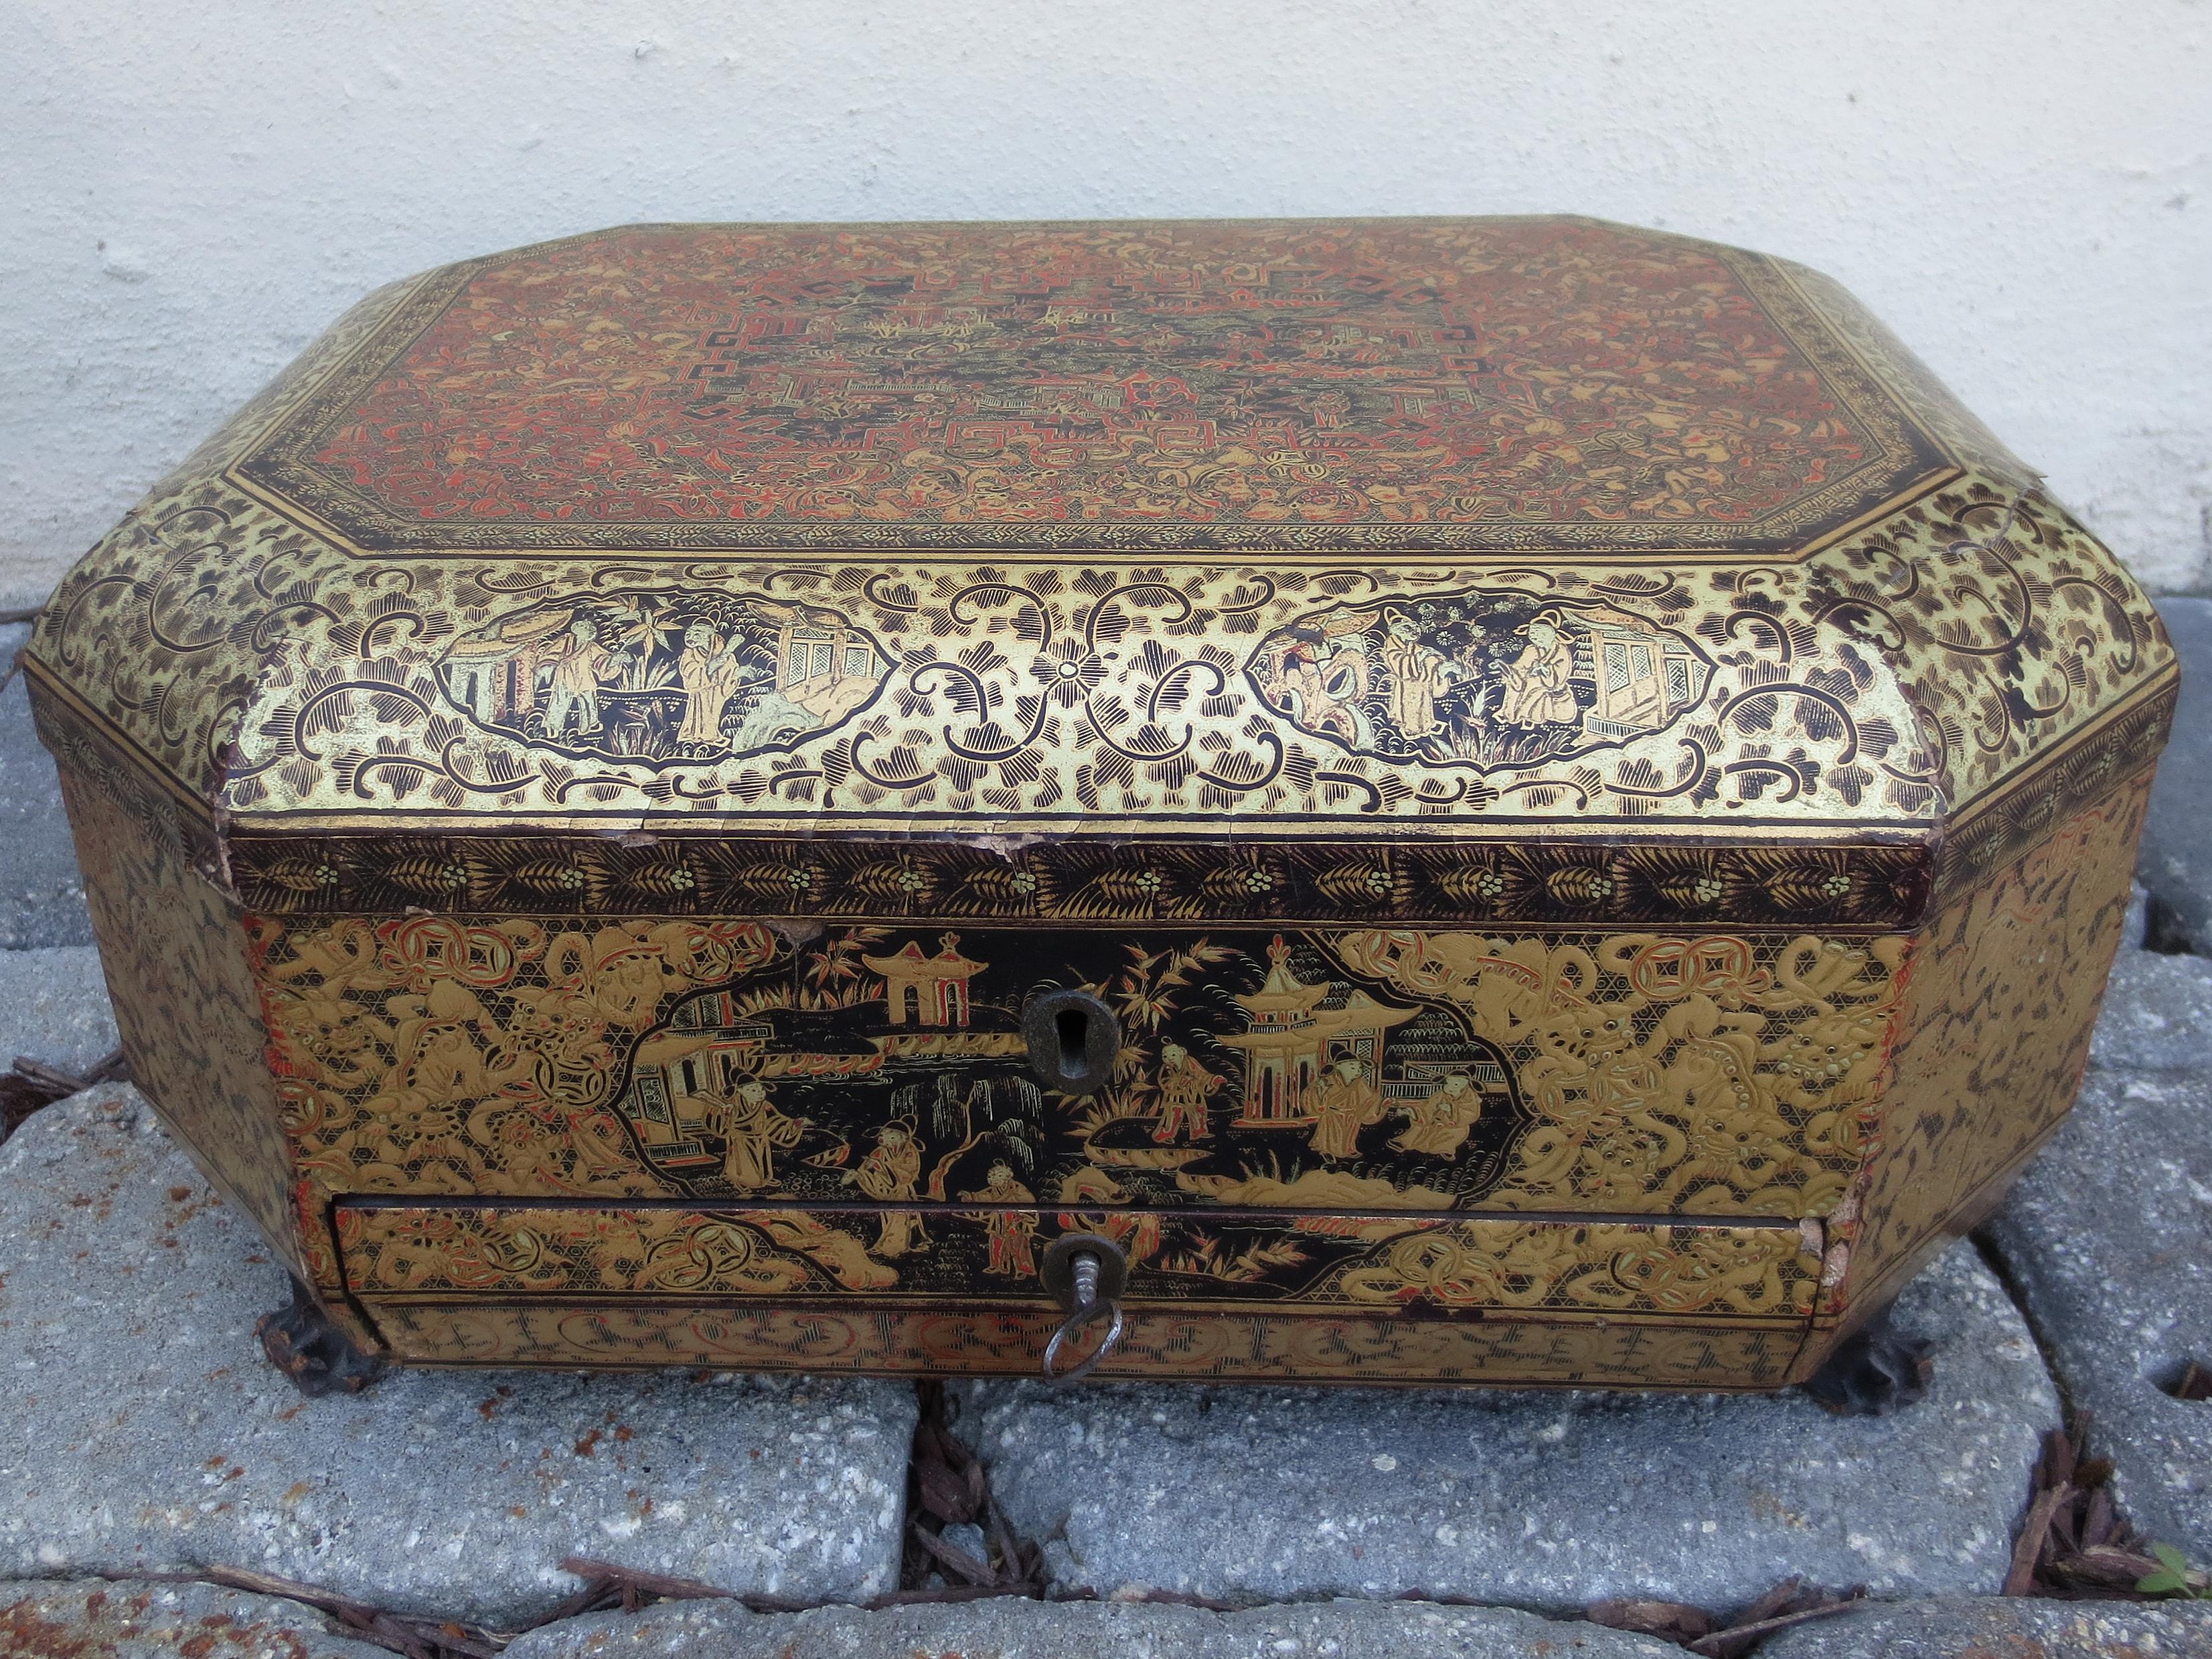 19th century chinoiserie lacquer box.